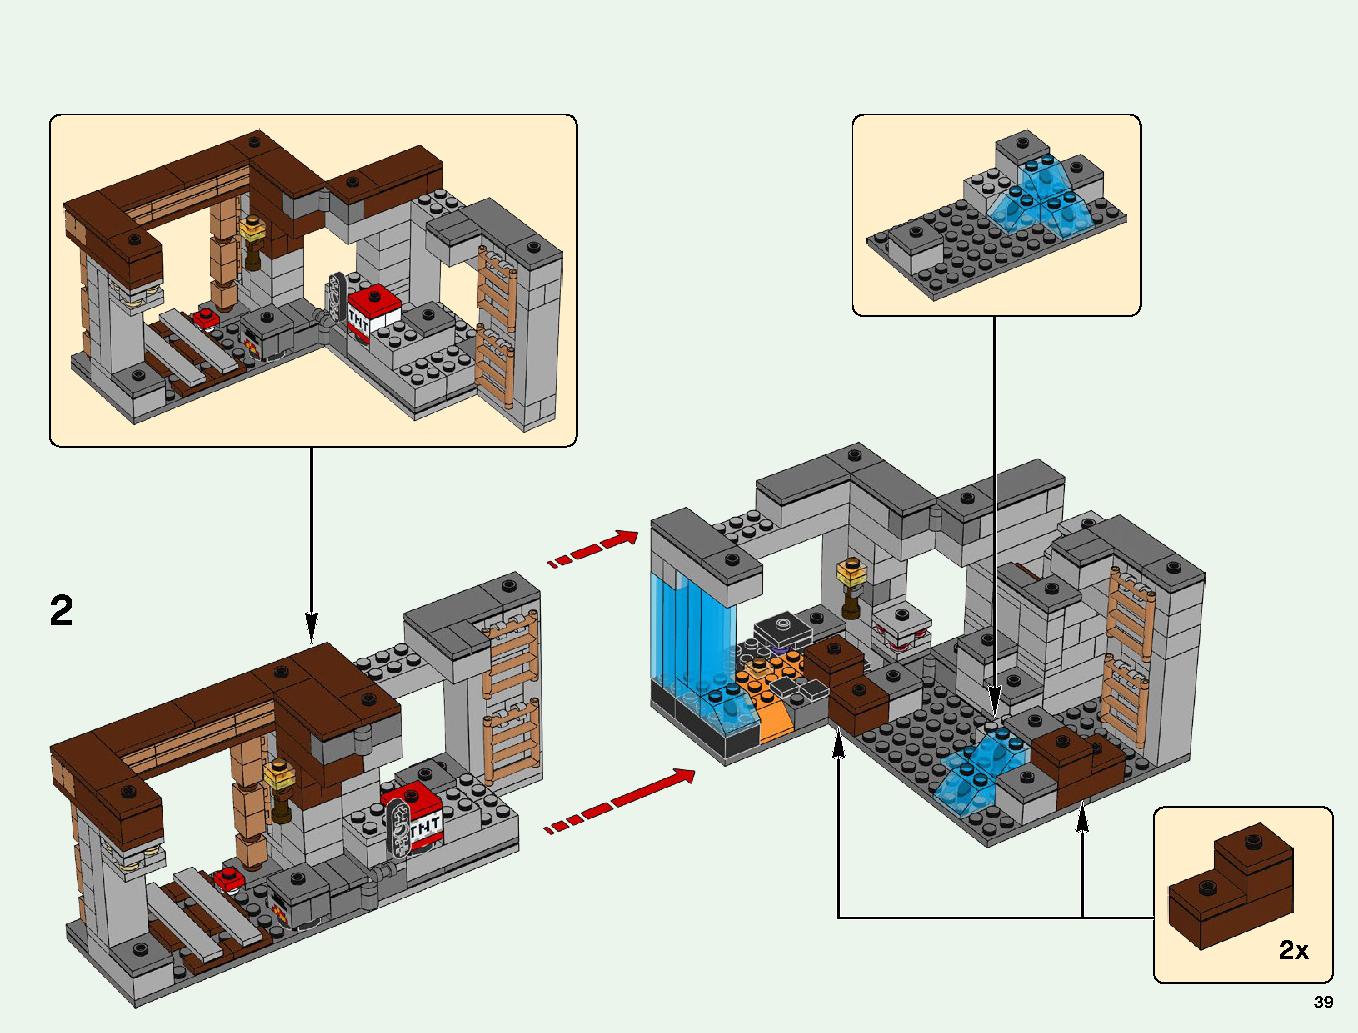 The Bedrock Adventures 21147 LEGO information LEGO instructions 39 page